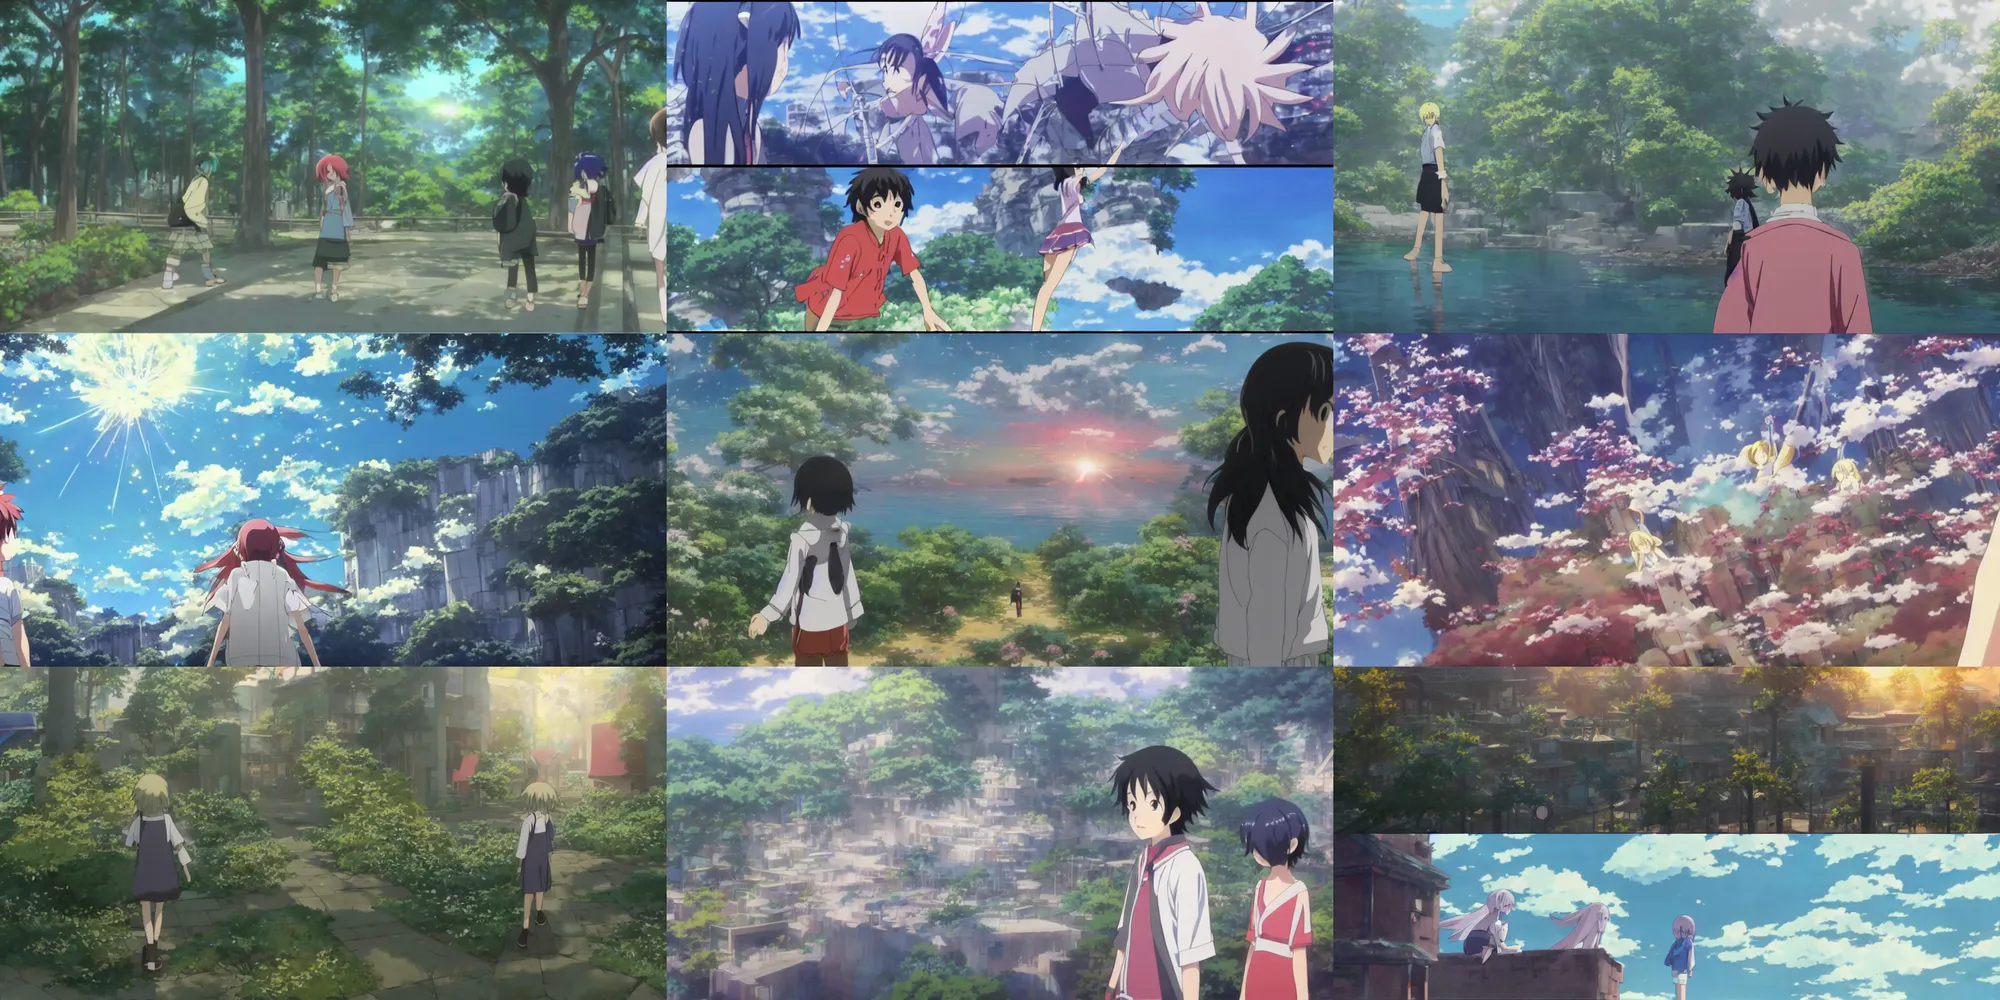 Prompt: screenshot from the anime film by Mamoru Hosoda, a painting of the virtual world, fantasy world, magical realism, looking through the prism at the digital world, screenshot from the anime series Sword Art Online, makoto shinkai, augmented reality, real life blended with digital world